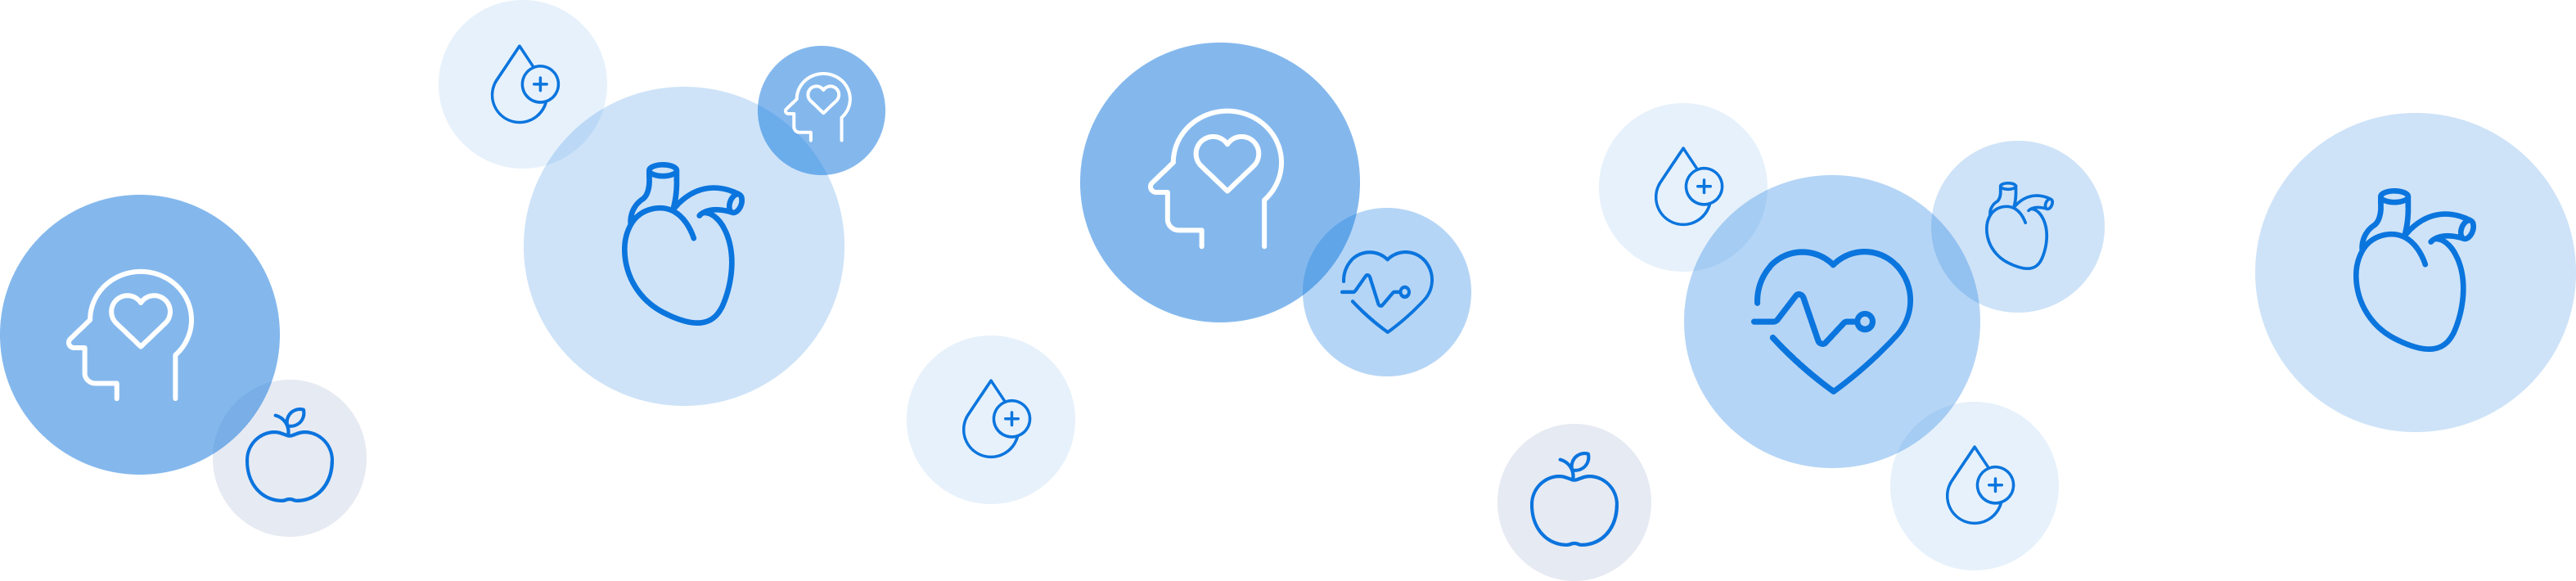 Graphic with icons in blue circles with different sizes, showing different chronic conditions